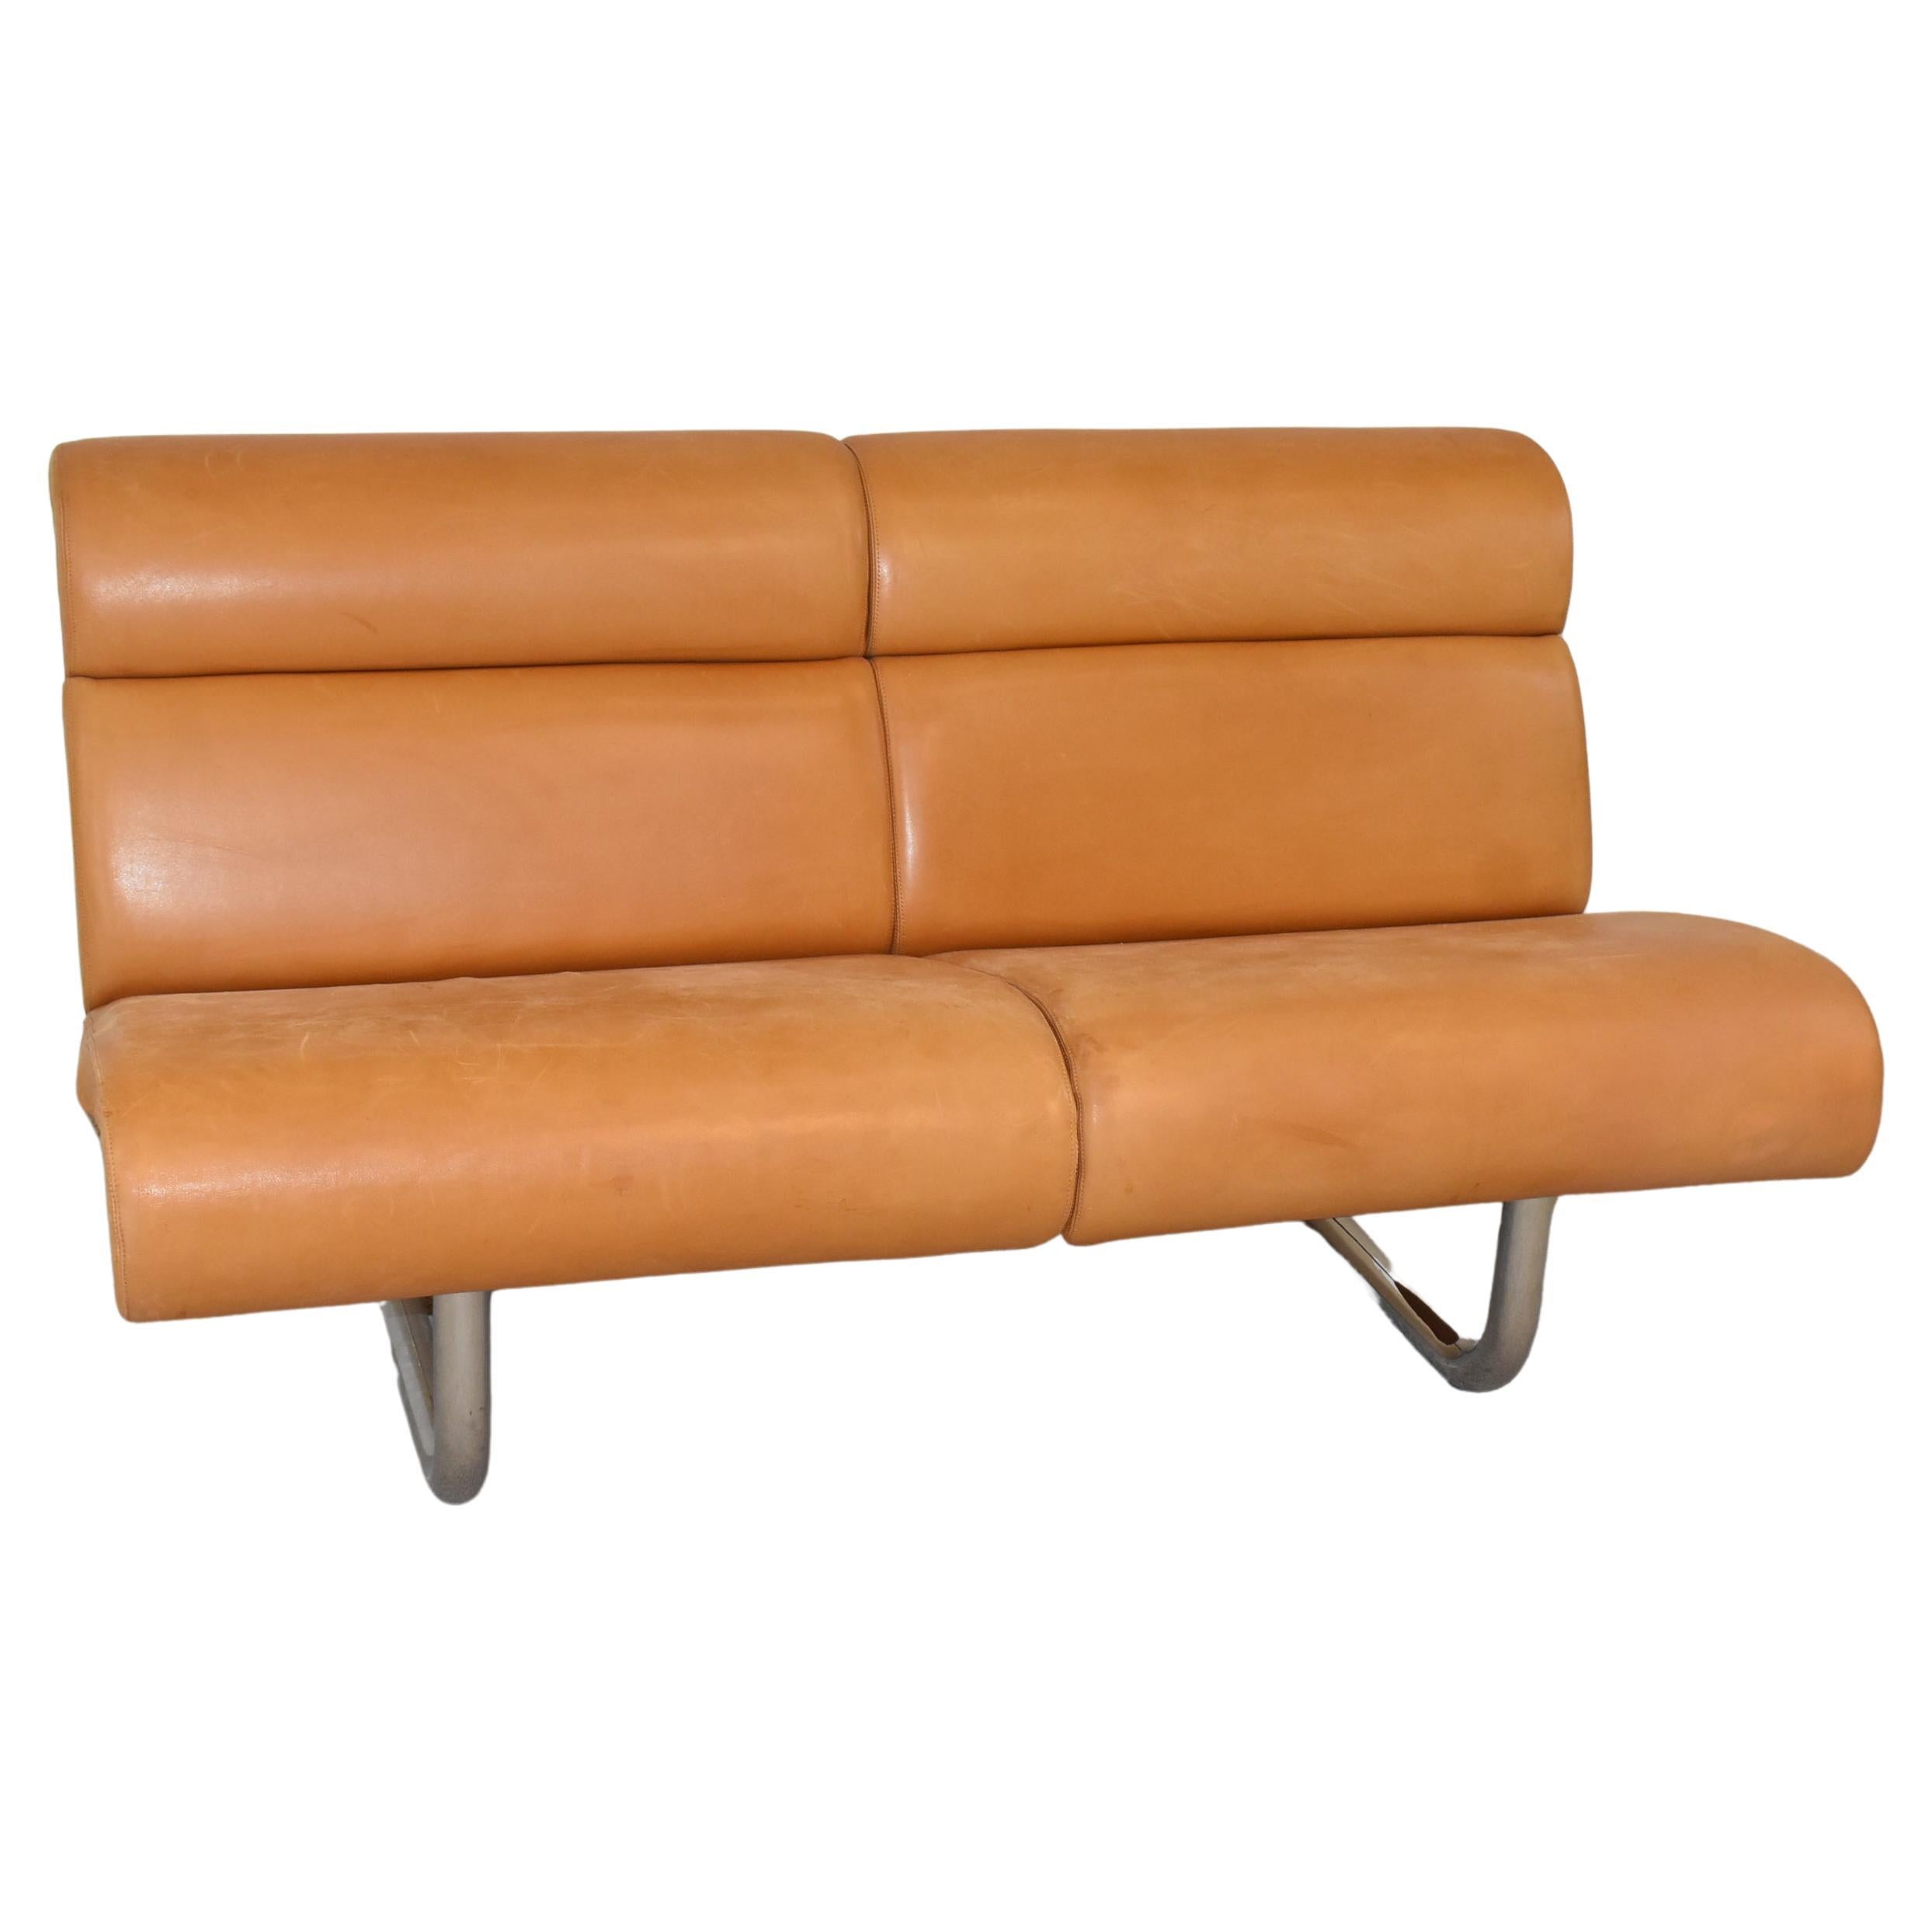 Tan Leather Sofa by Richard Schultz for Knoll For Sale